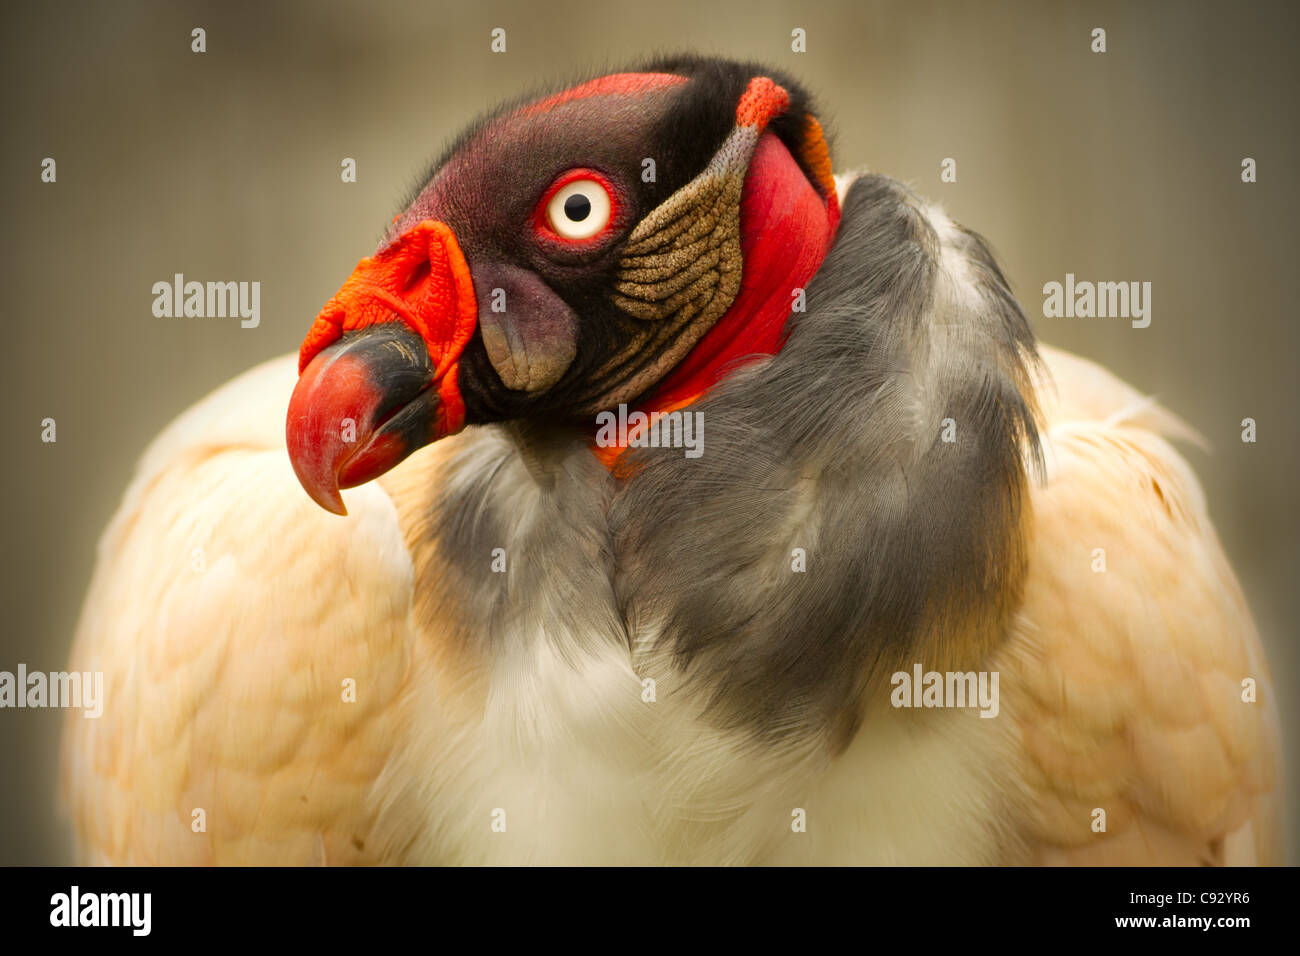 CLOSE UP PORTRAIT OF A KING VULTURE IN CAPTIVITY Stock Photo